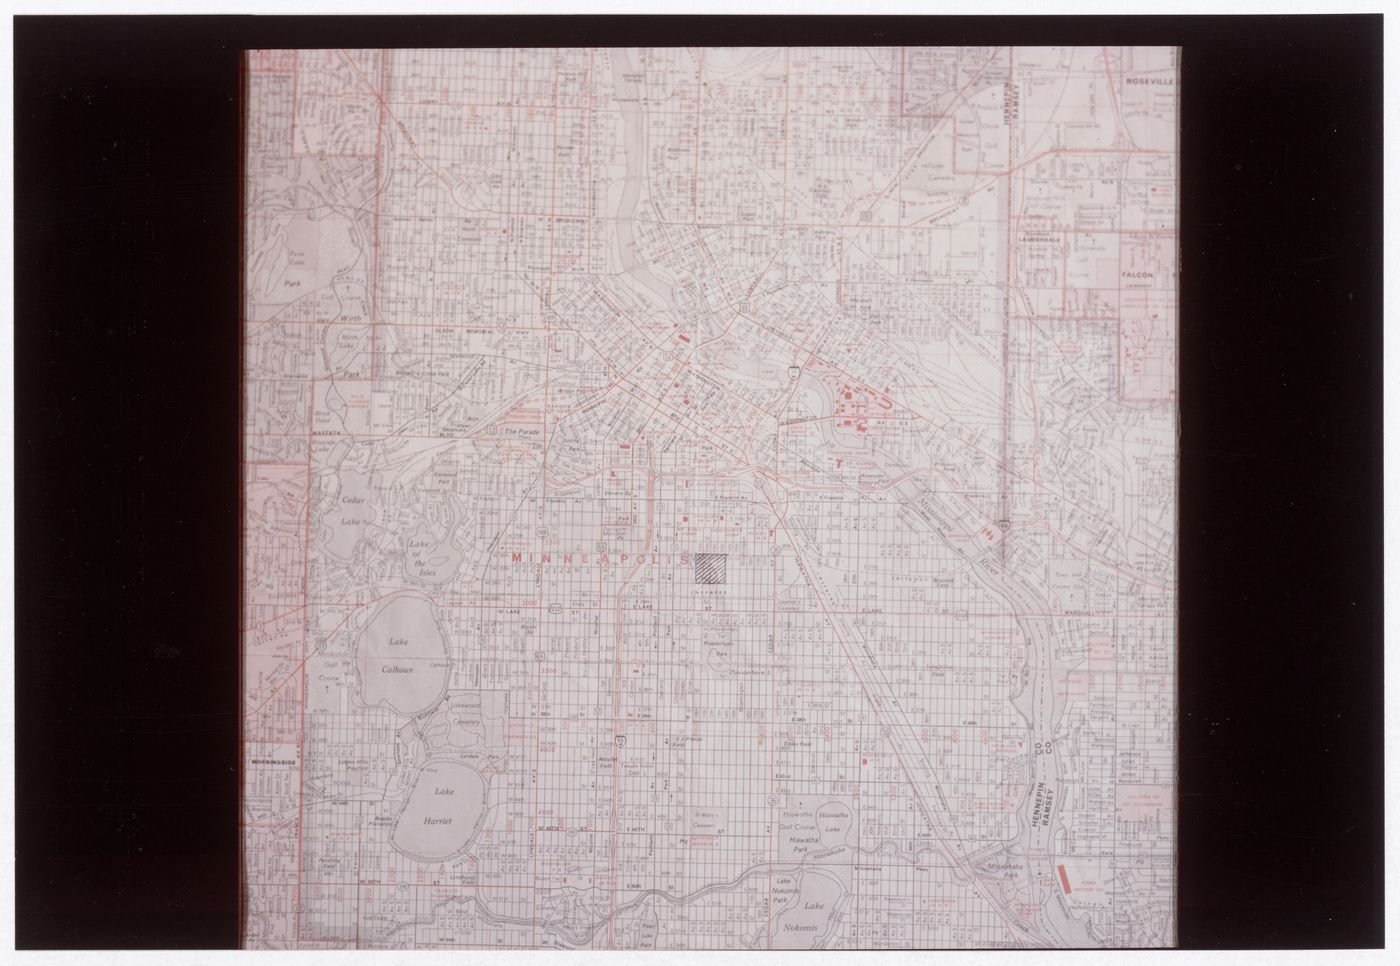 Photograph of a map of Minneapolis for Ice House II